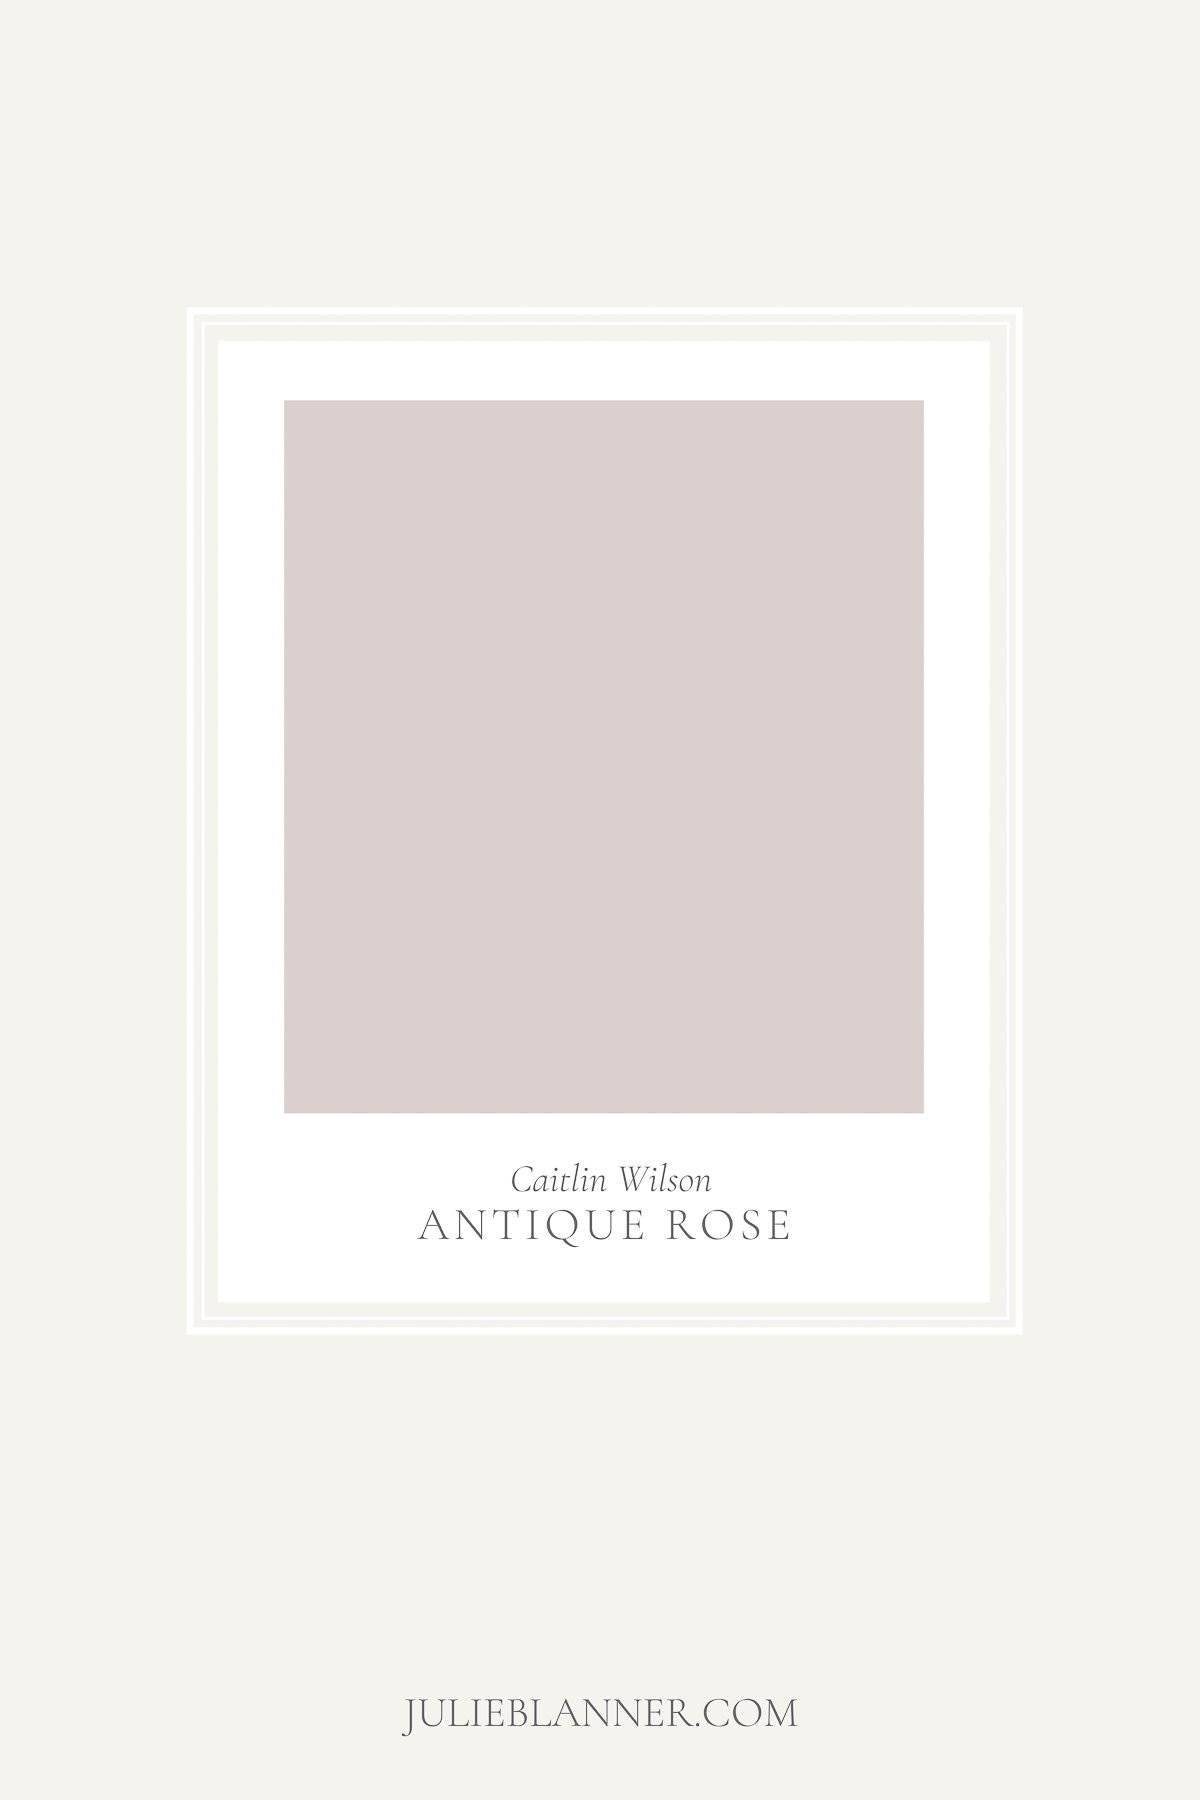 A paint sample card of Caitlin Wilson Antique Rose, as part of a blush pink paint guide.